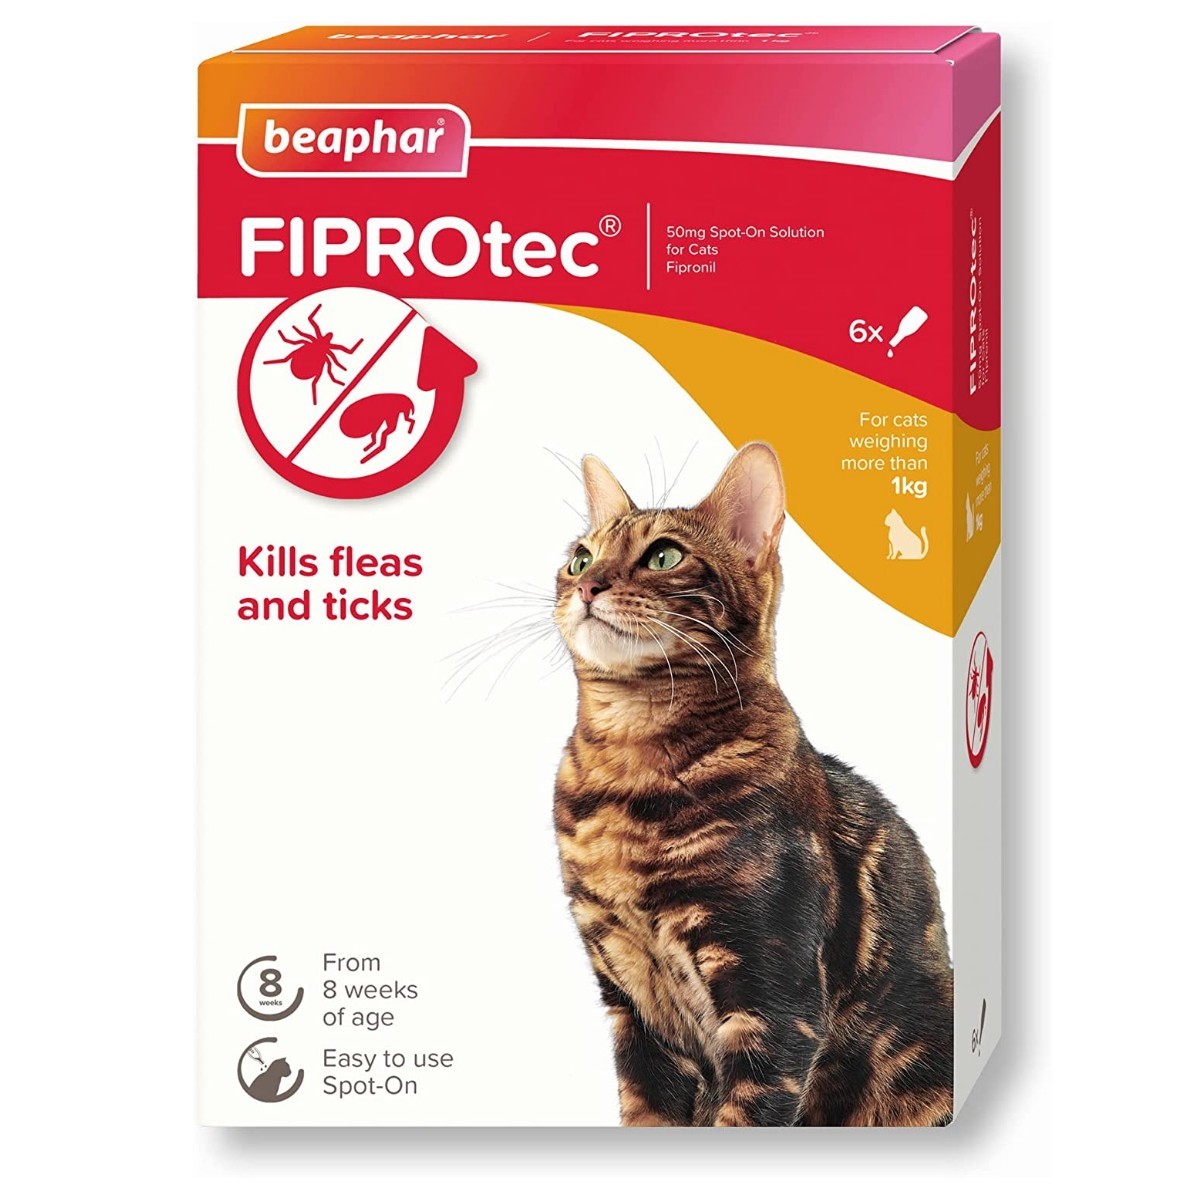 FIPROtec Spot-On Solution for - From £8.40